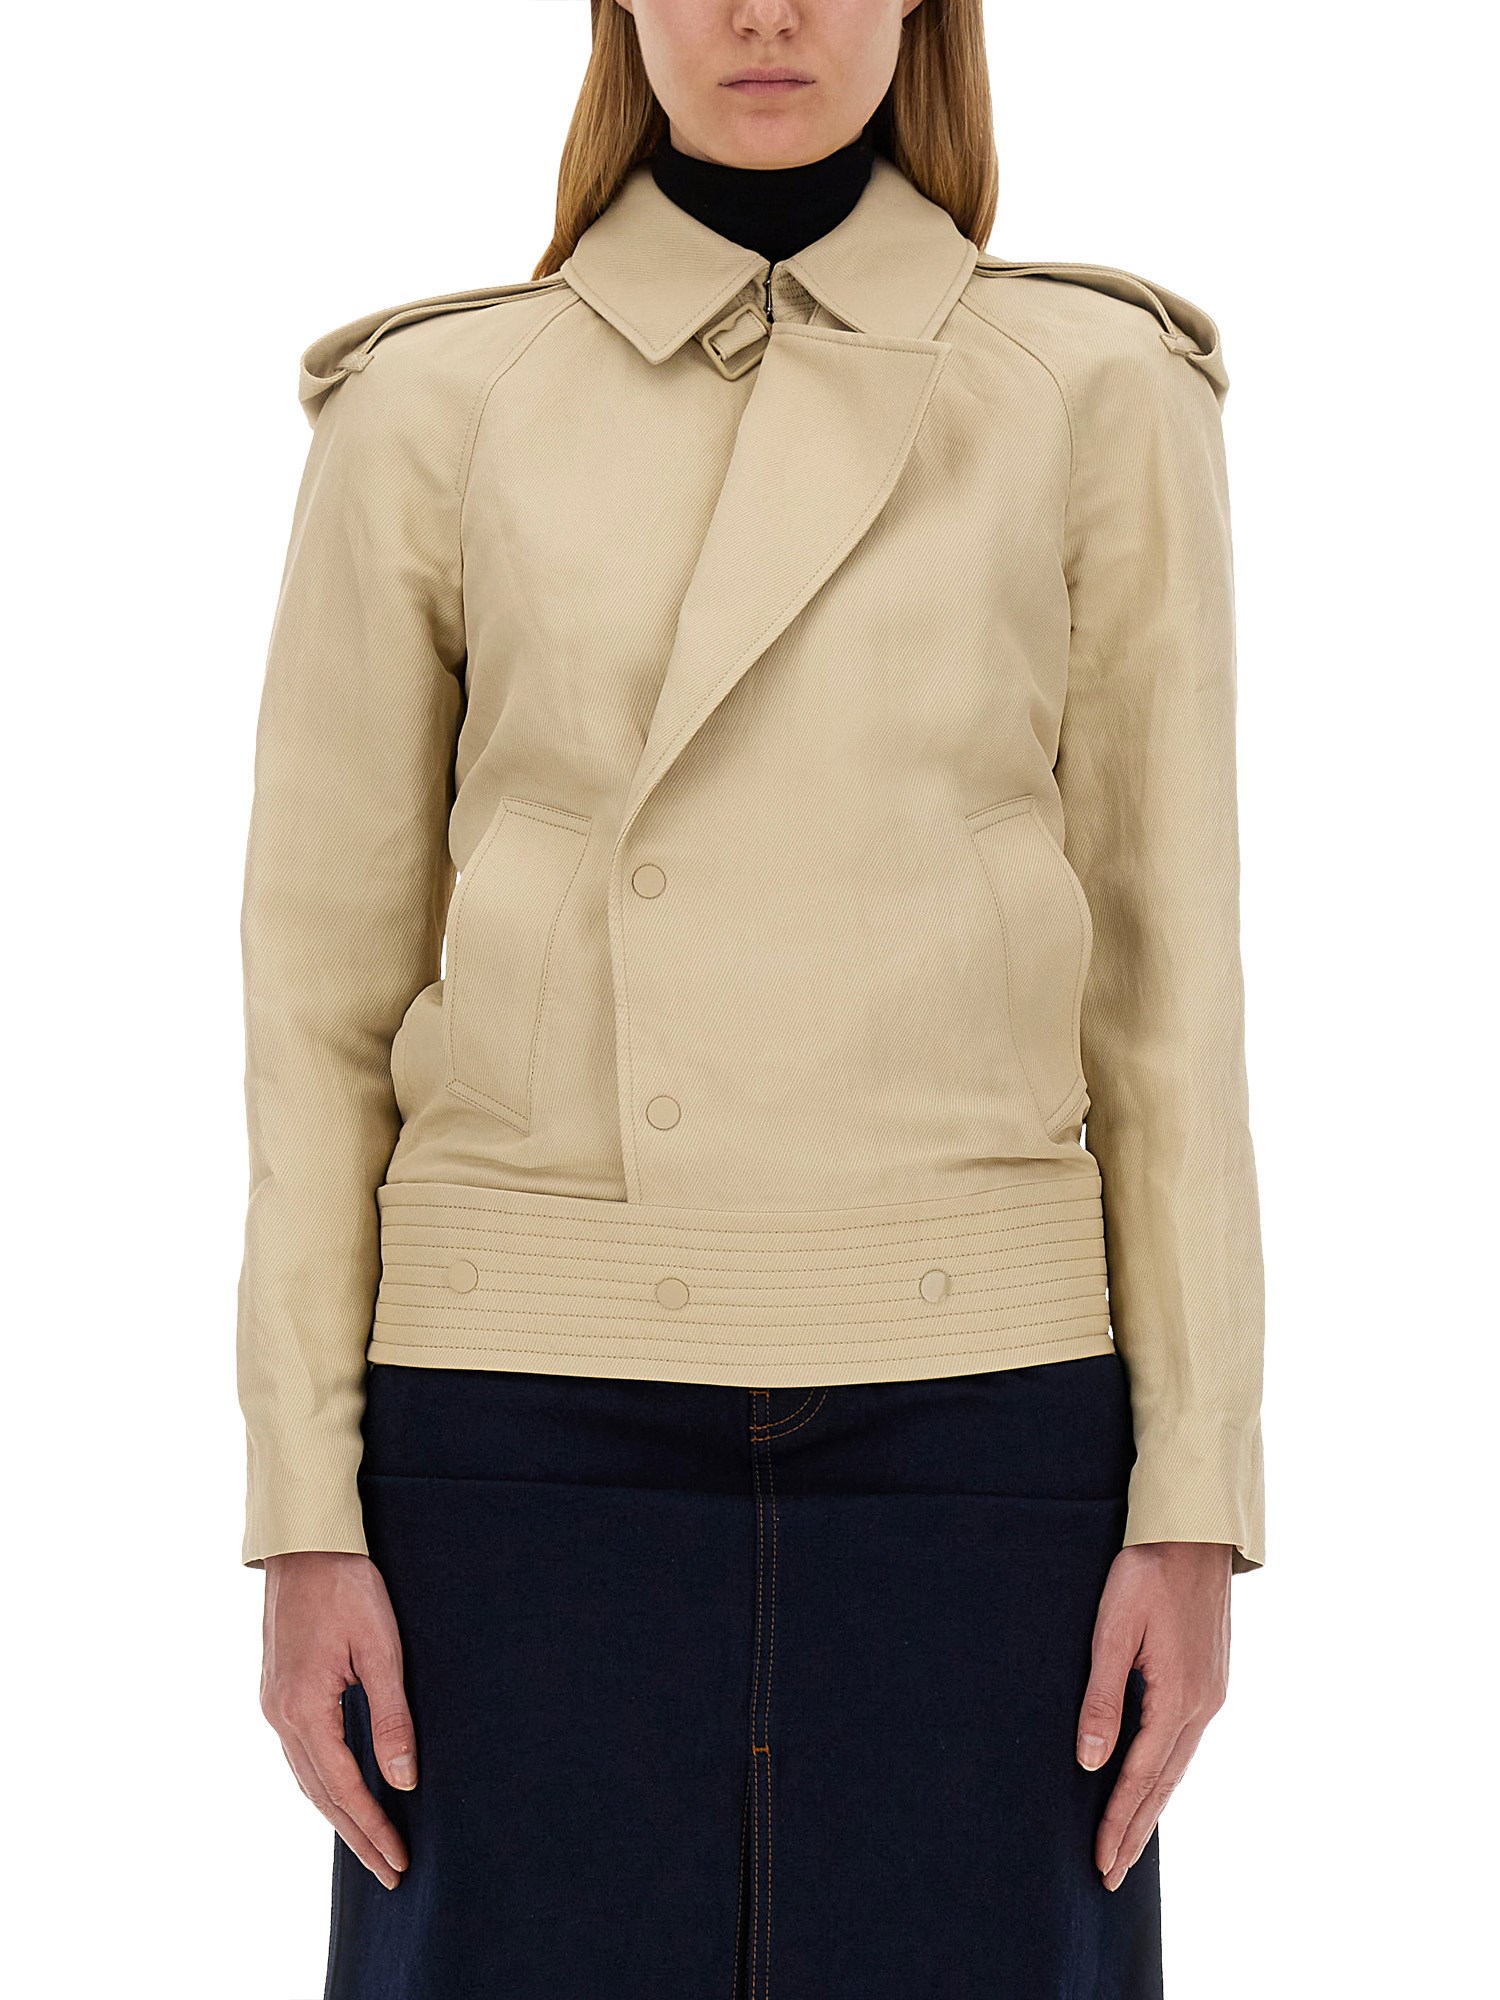 Burberry burberry trench jacket